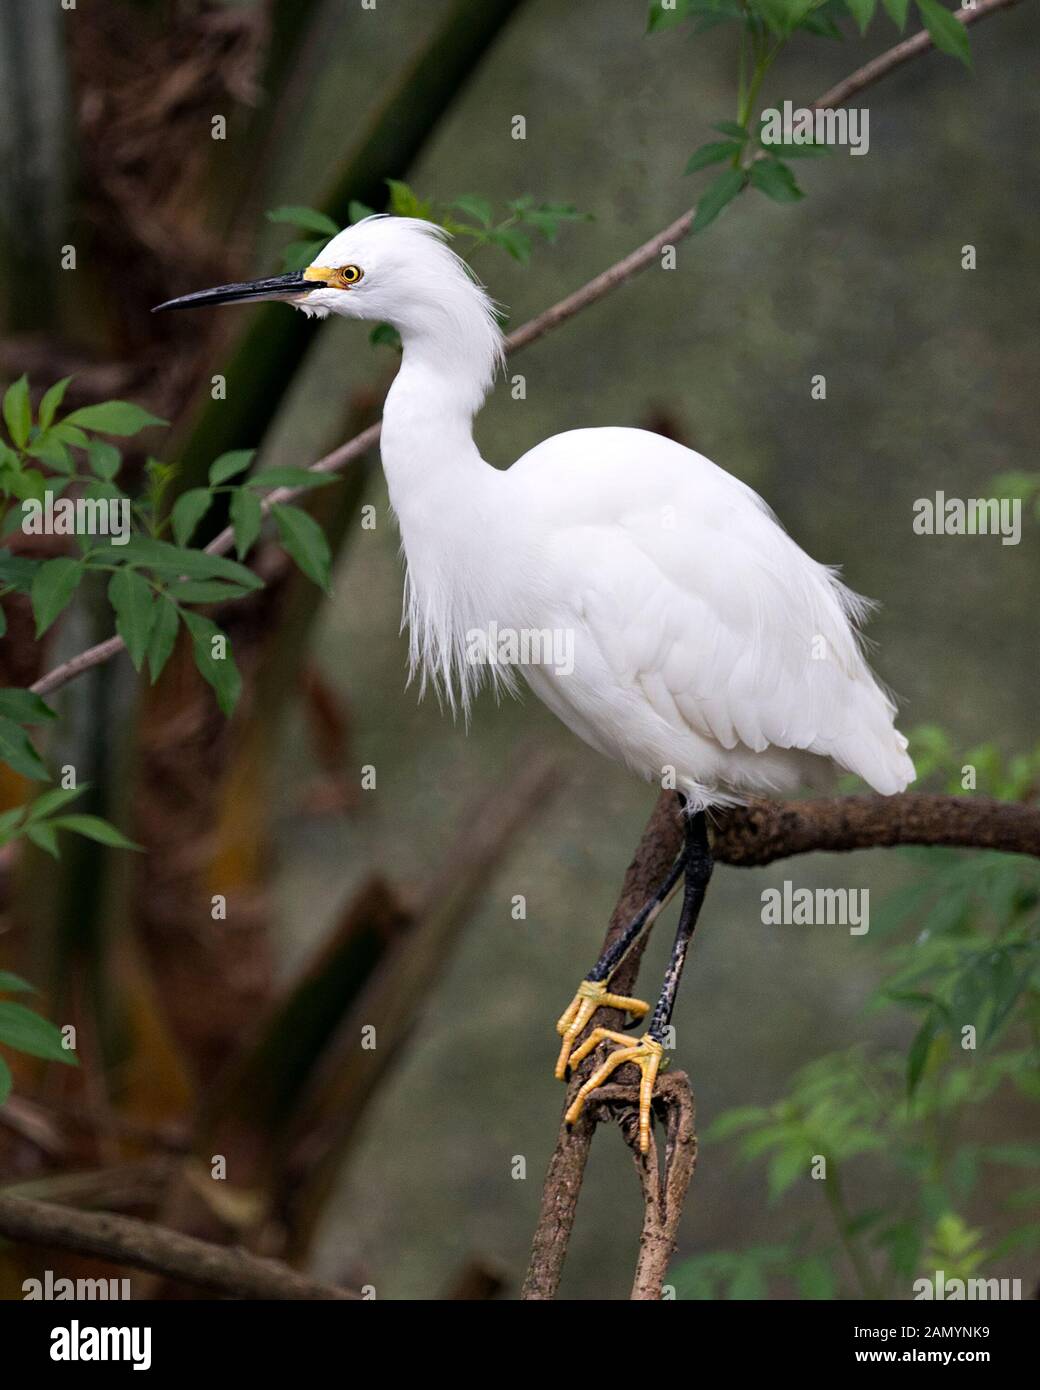 Snowy Egret close up profile view perched with a bokeh background   displaying white feathers plumage, fluffy plumage, head, beak, eye, feet in its en Stock Photo